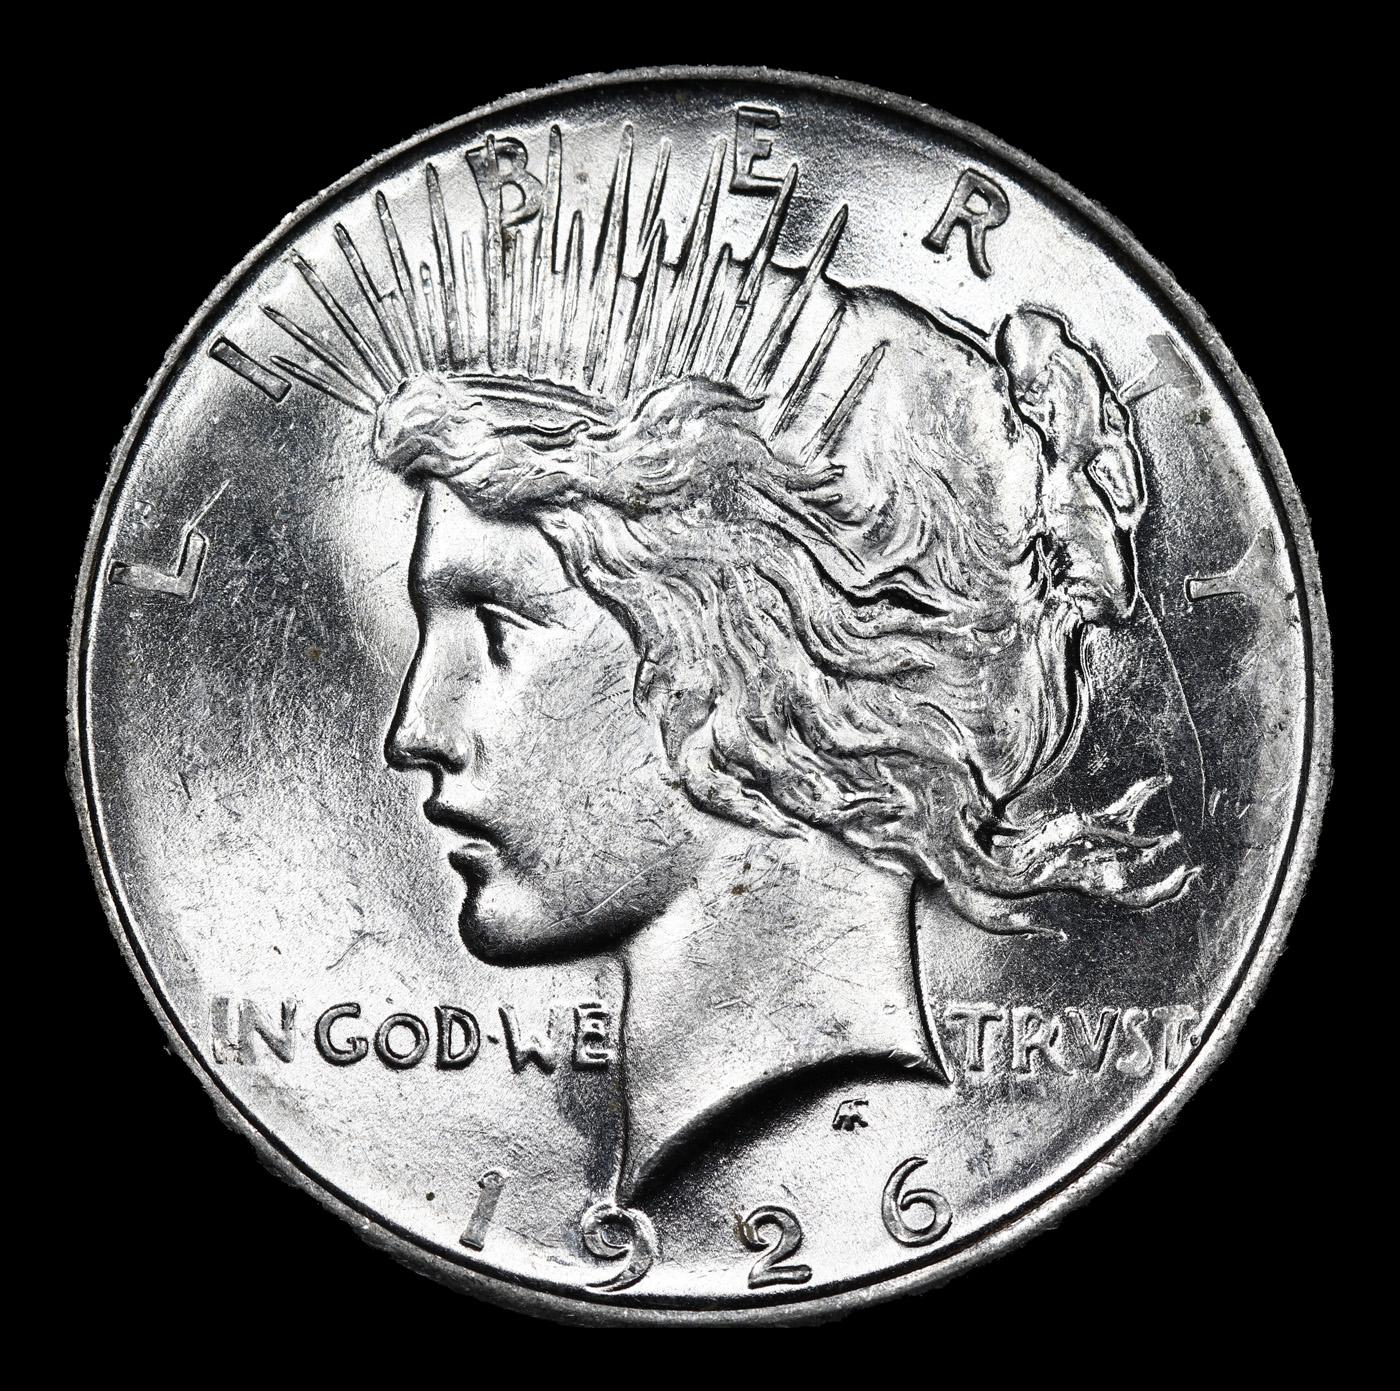 ***Auction Highlight*** 1926-d Peace Dollar $1 Graded ms64+ By SEGS (fc)